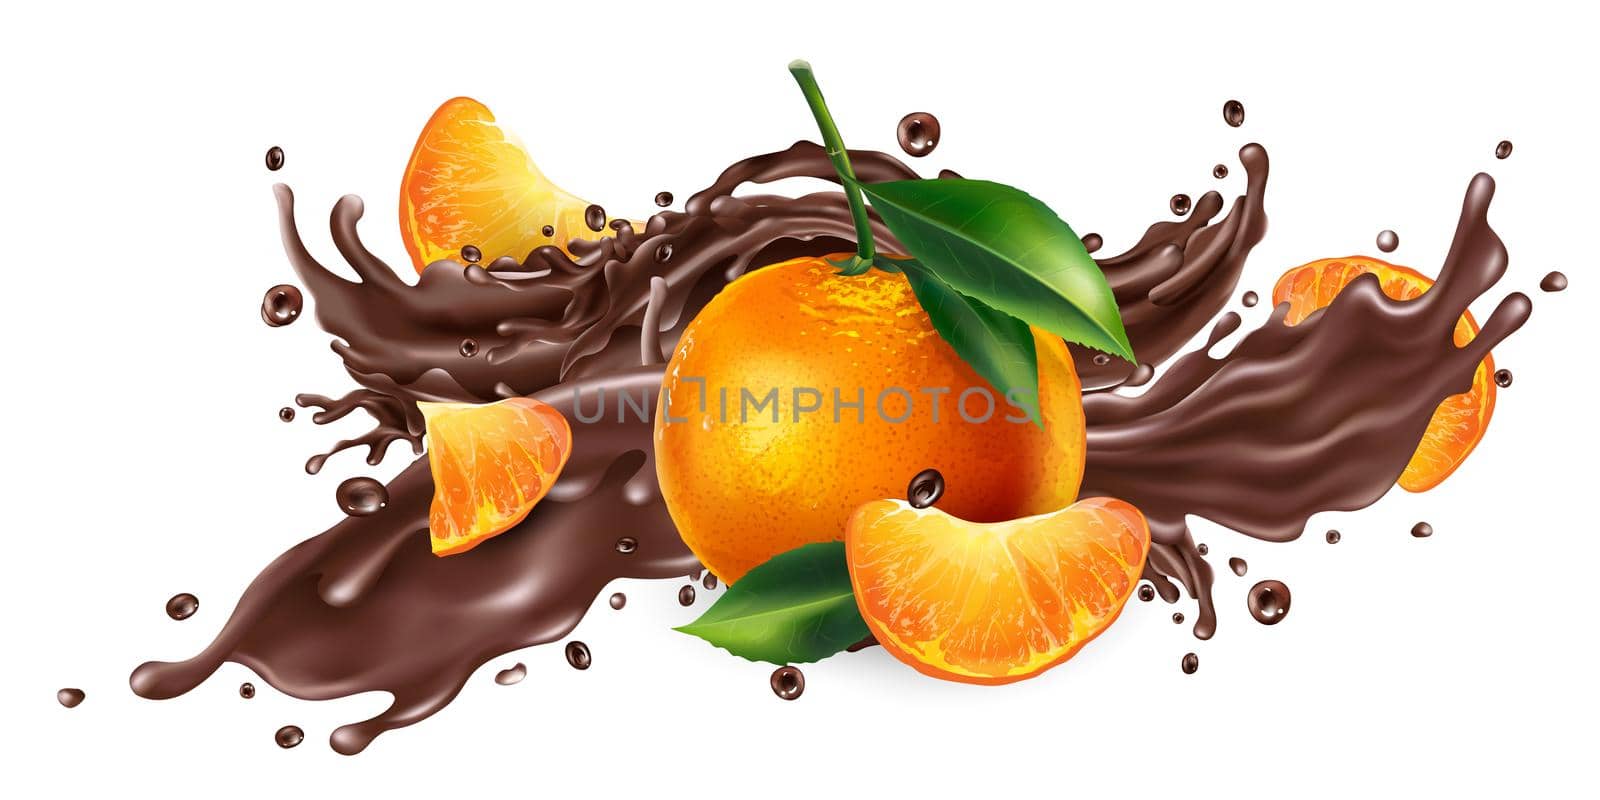 Whole and sliced mandarins and a splash of liquid chocolate on a white background. Realistic style illustration.